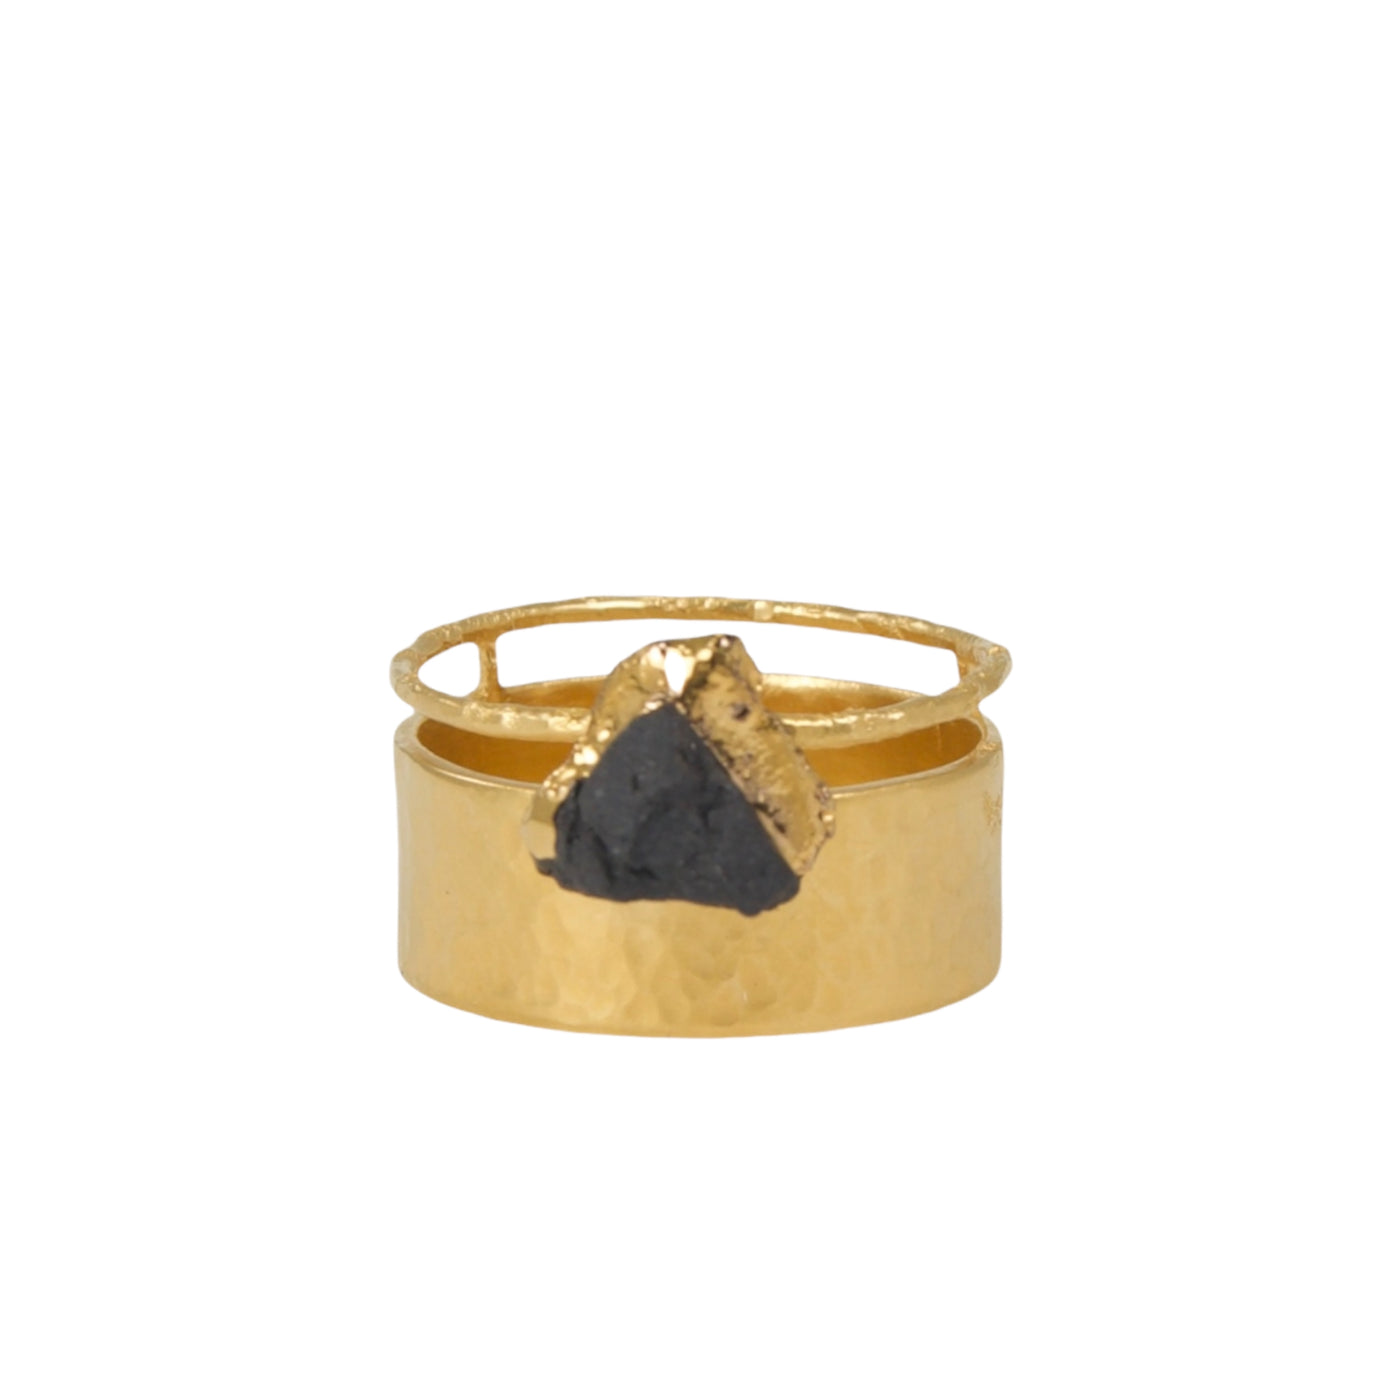 "Mindat" Gold Plated Silver Ring With Porcelain